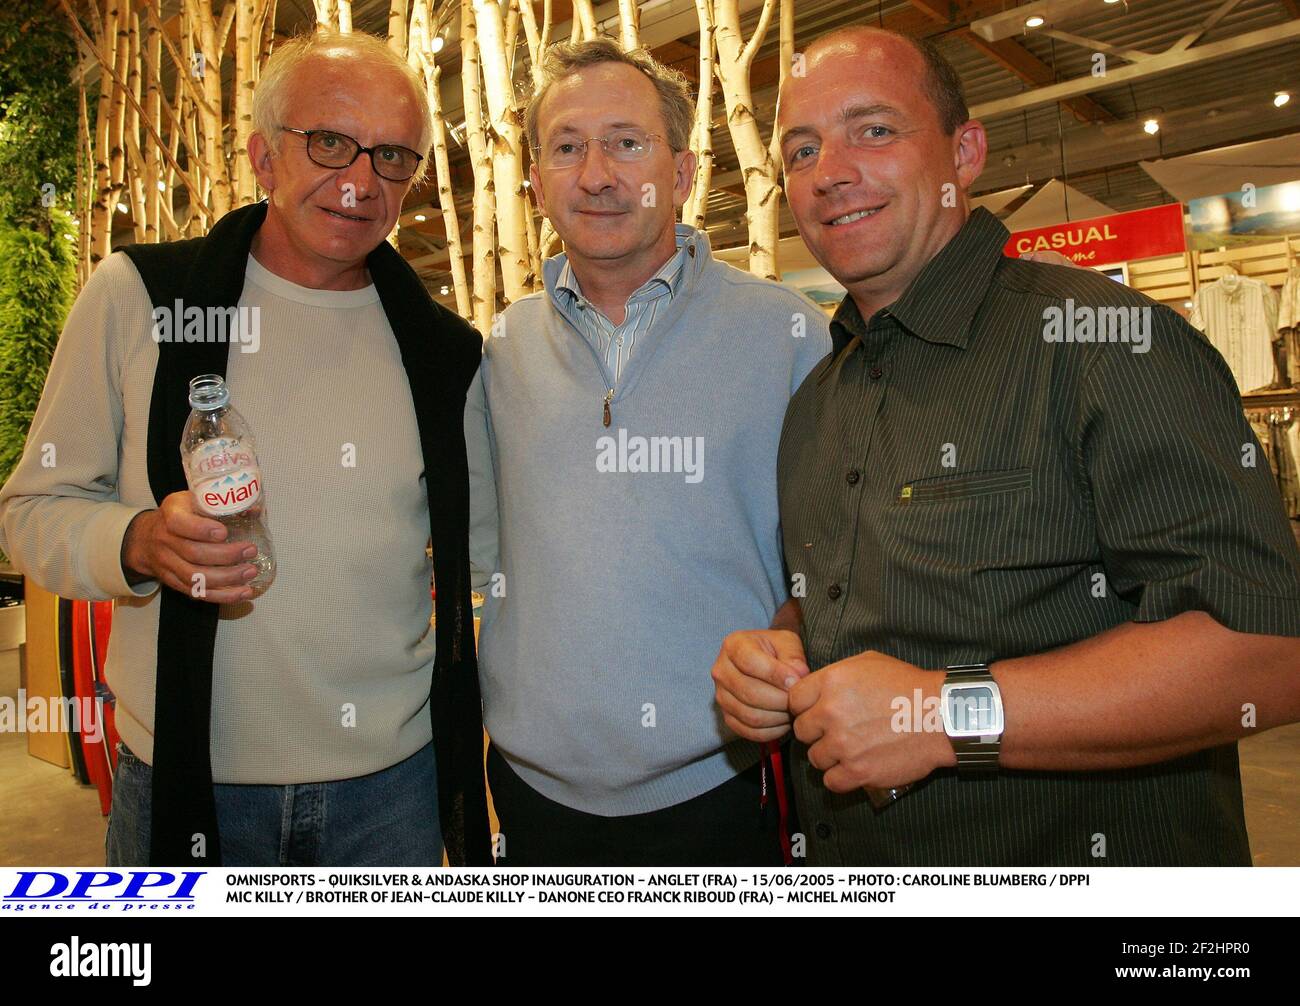 OMNISPORTS - QUIKSILVER & ANDASKA SHOP INAUGURATION - ANGLET (FRA) - 15/06/2005 - PHOTO : CAROLINE BLUMBERG / DPPI MIC KILLY / BROTHER OF JEAN-CLAUDE KILLY - DANONE CEO FRANCK RIBOUD (FRA) - MICHEL MIGNOT Stock Photo